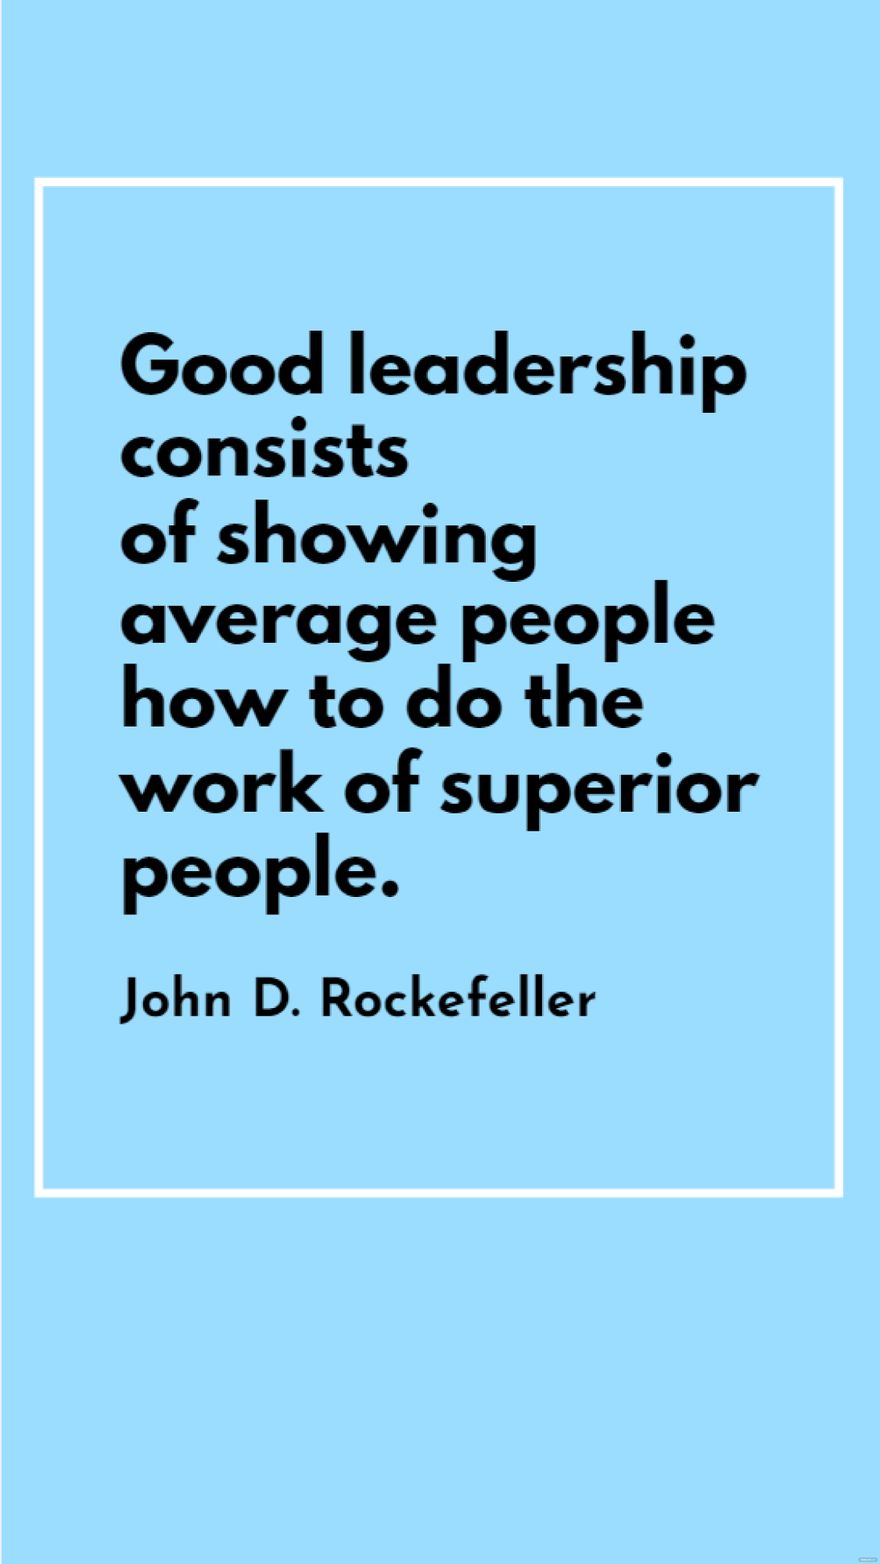 Free John D. Rockefeller - Good leadership consists of showing average people how to do the work of superior people.